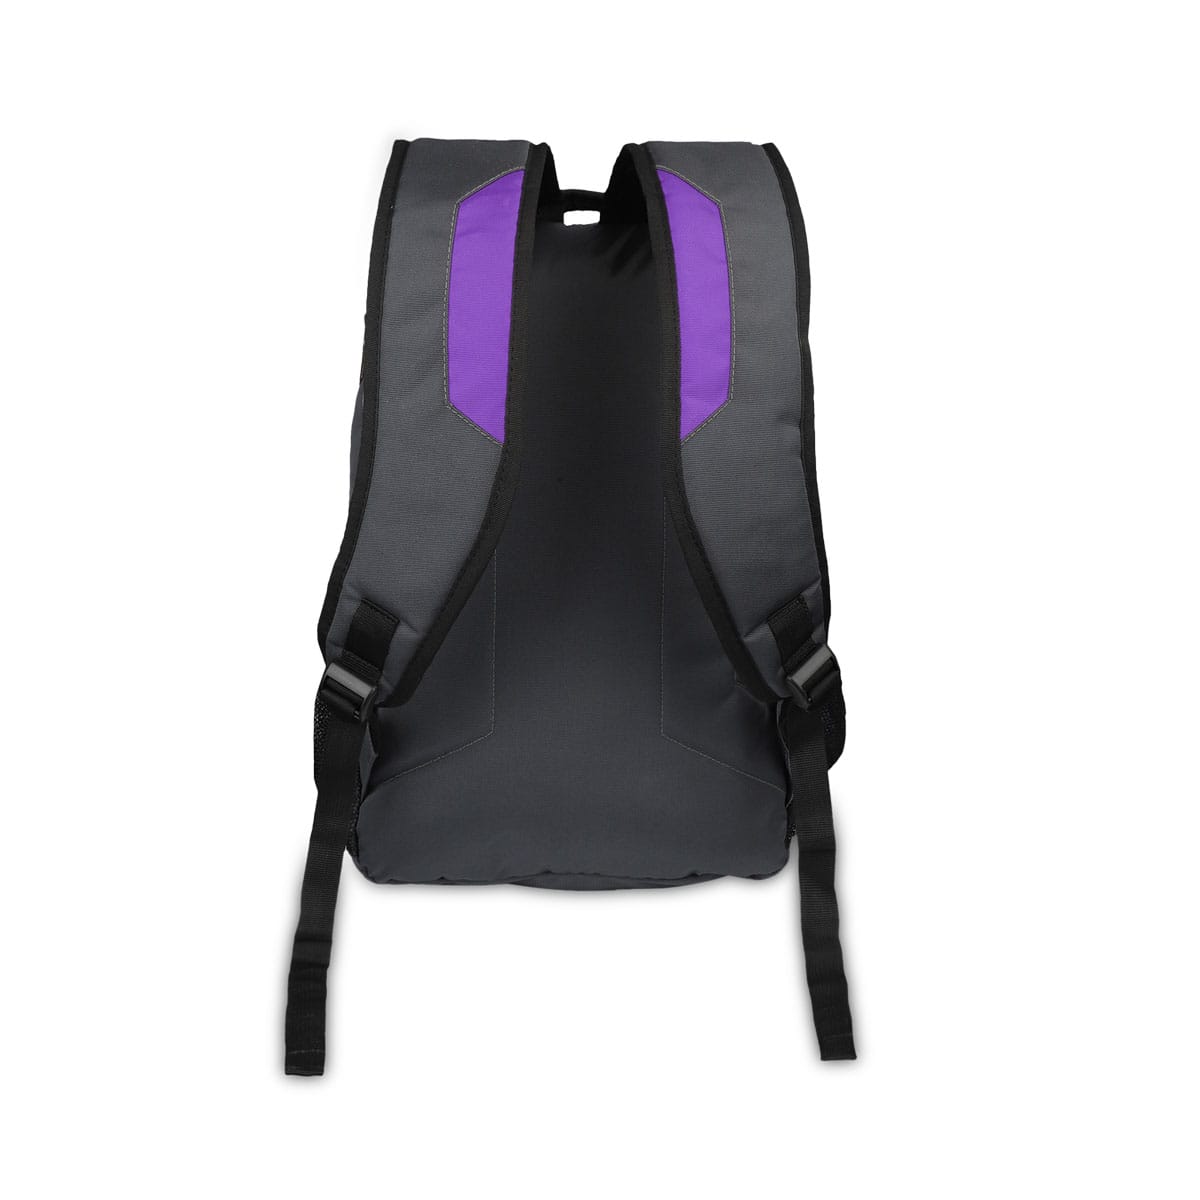 Grey-Violet | Protecta Harmony Laptop Backpack-3